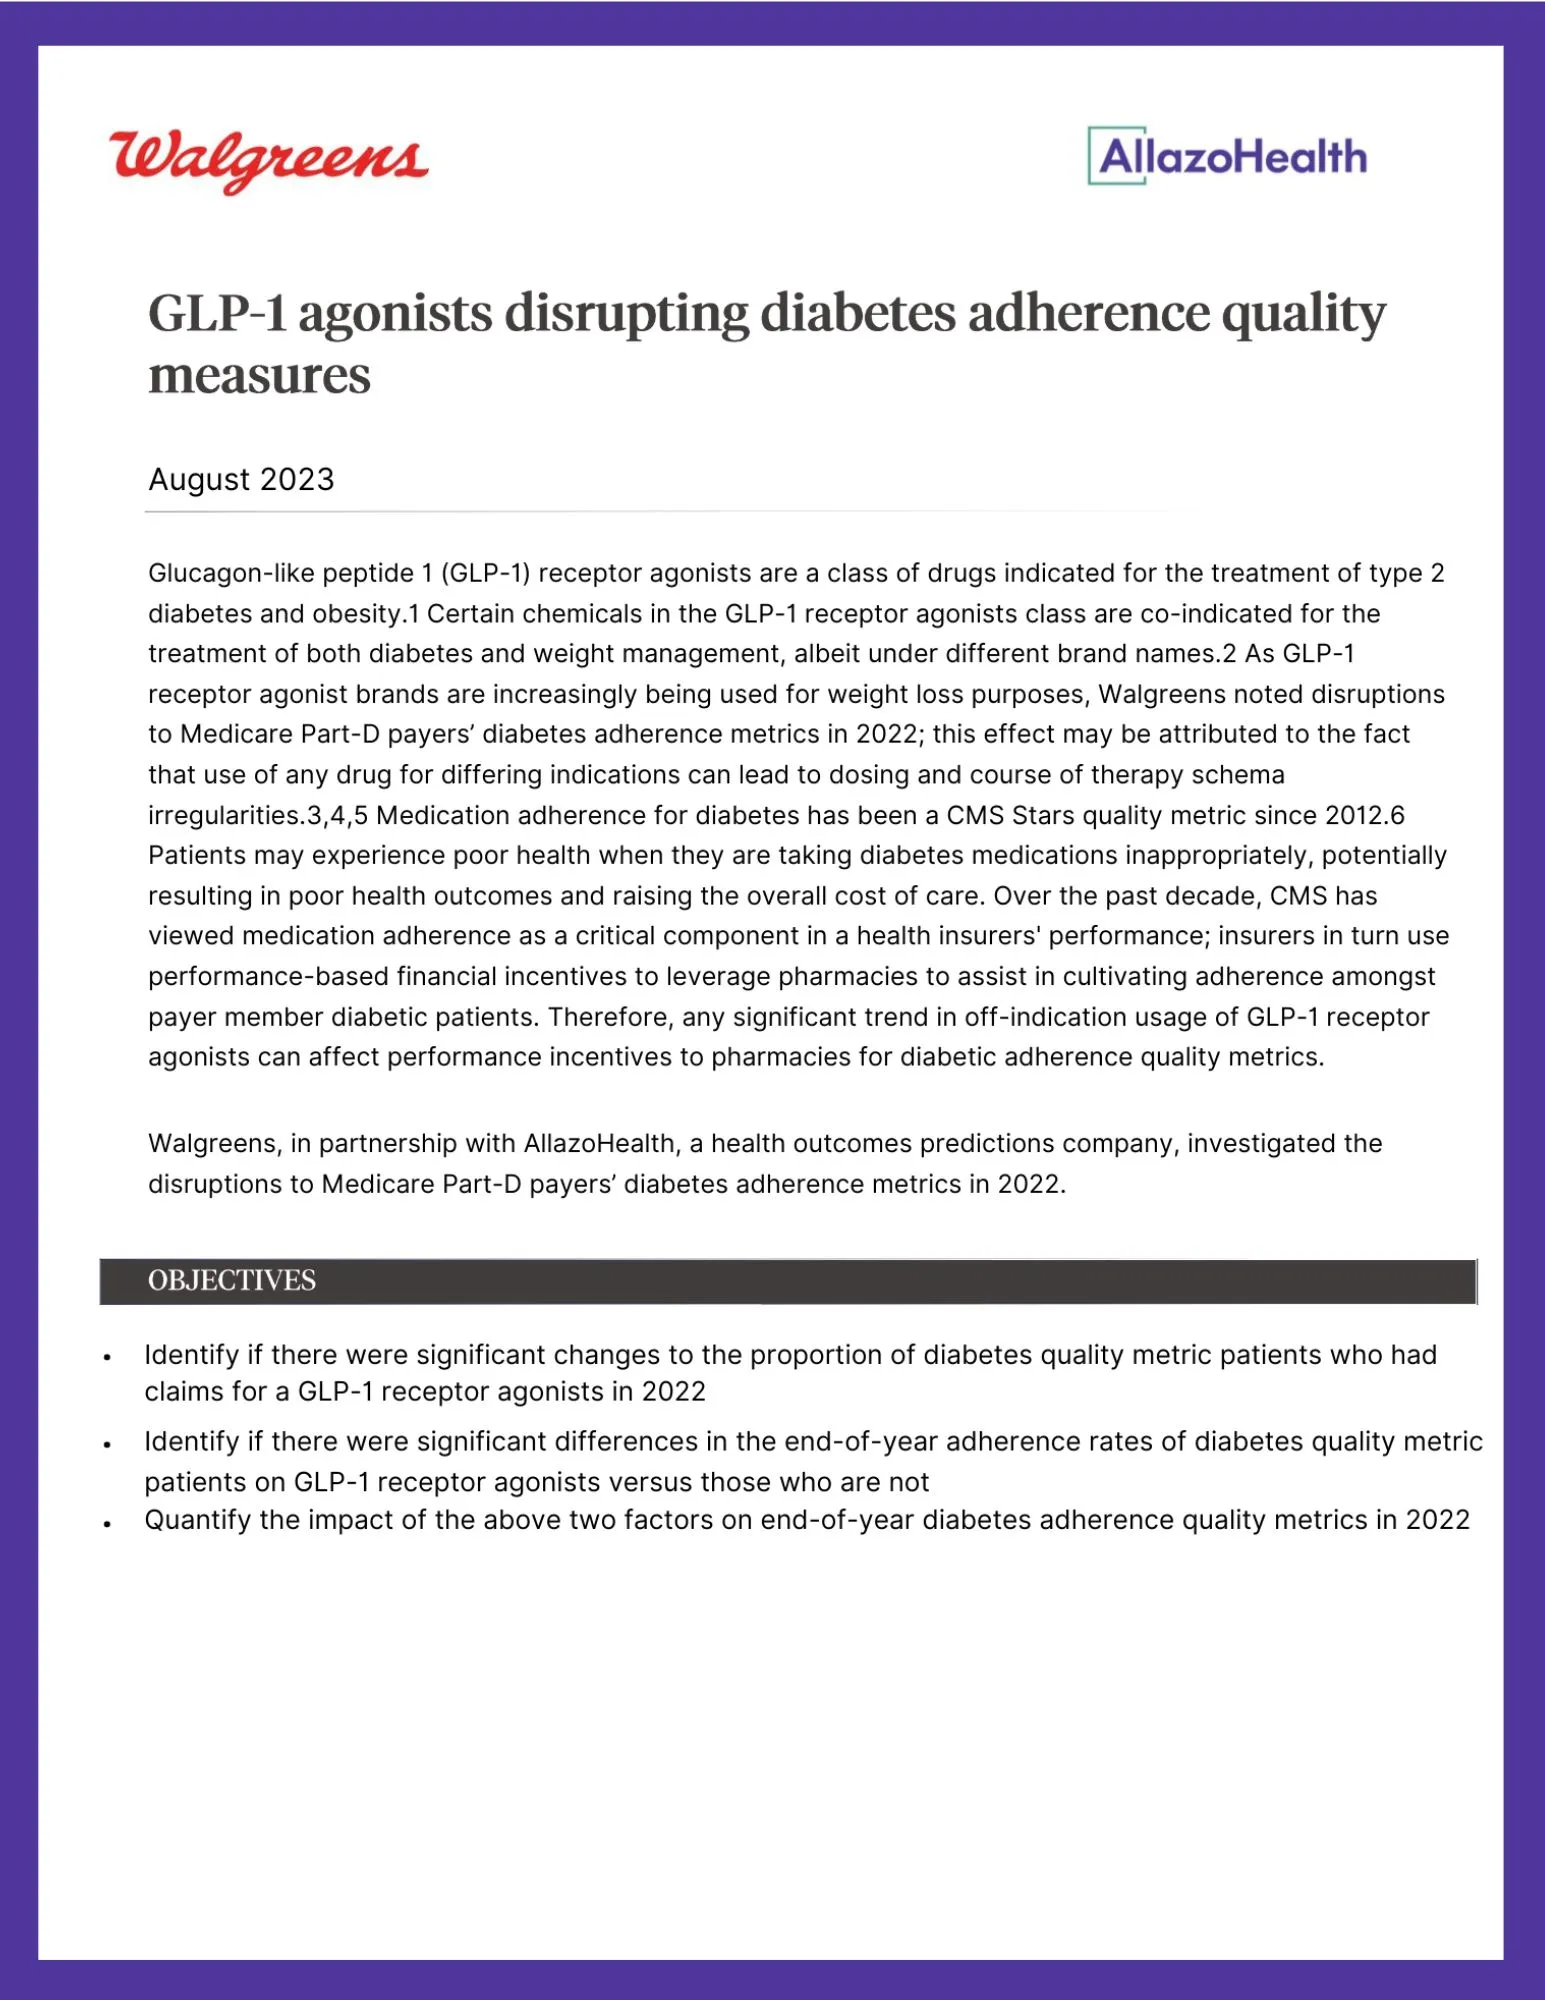 Walgreens GLP-1 results in partnership with AllazoHealth